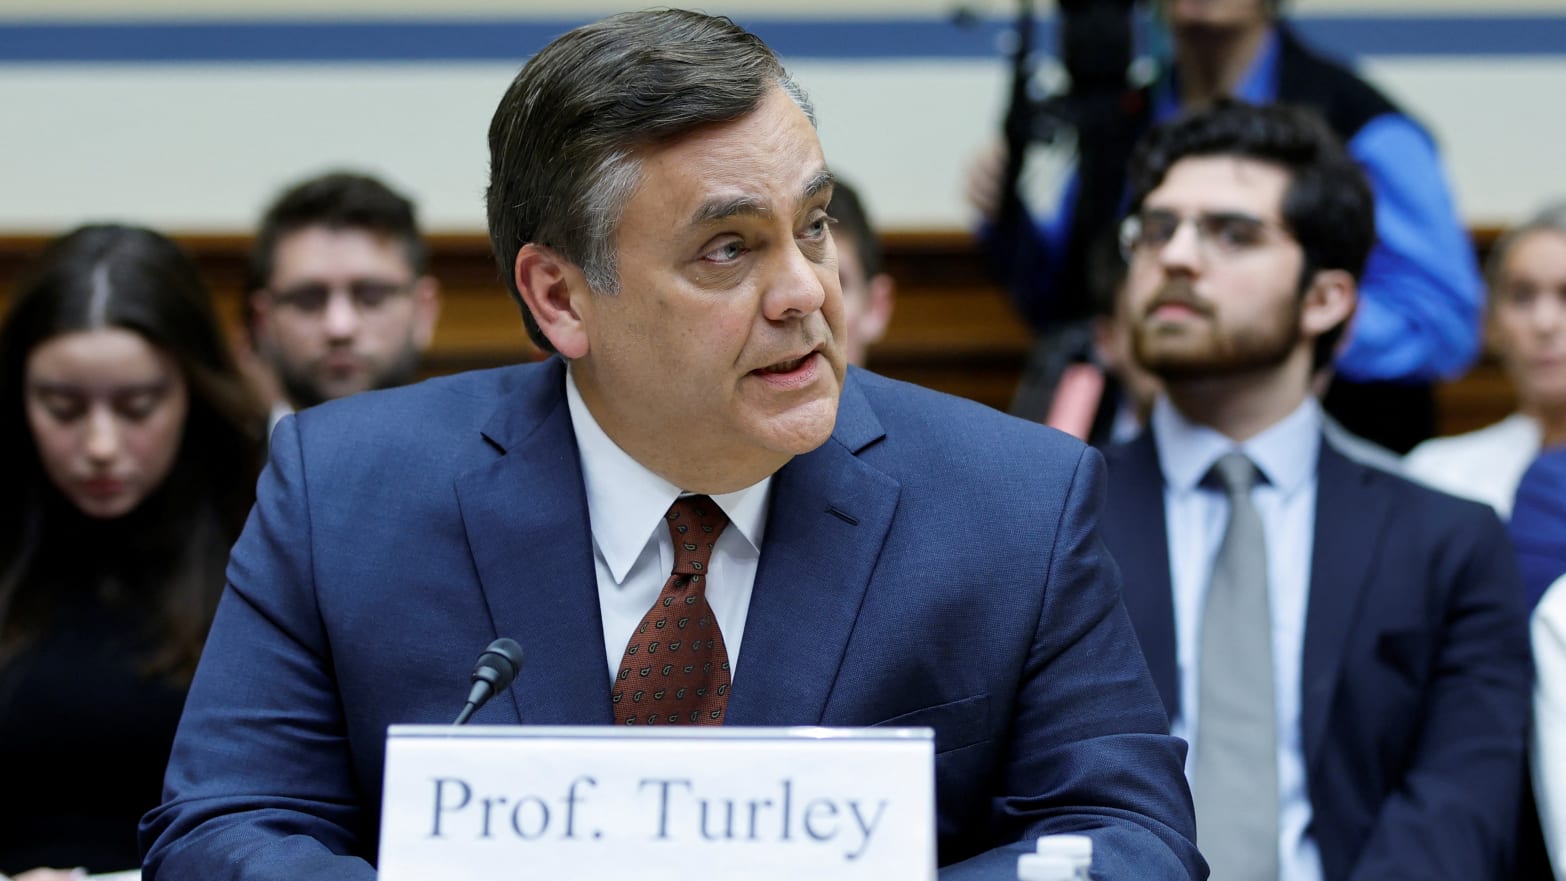 Jonathan Turley looks to the left while speaking during a House committee meeting.